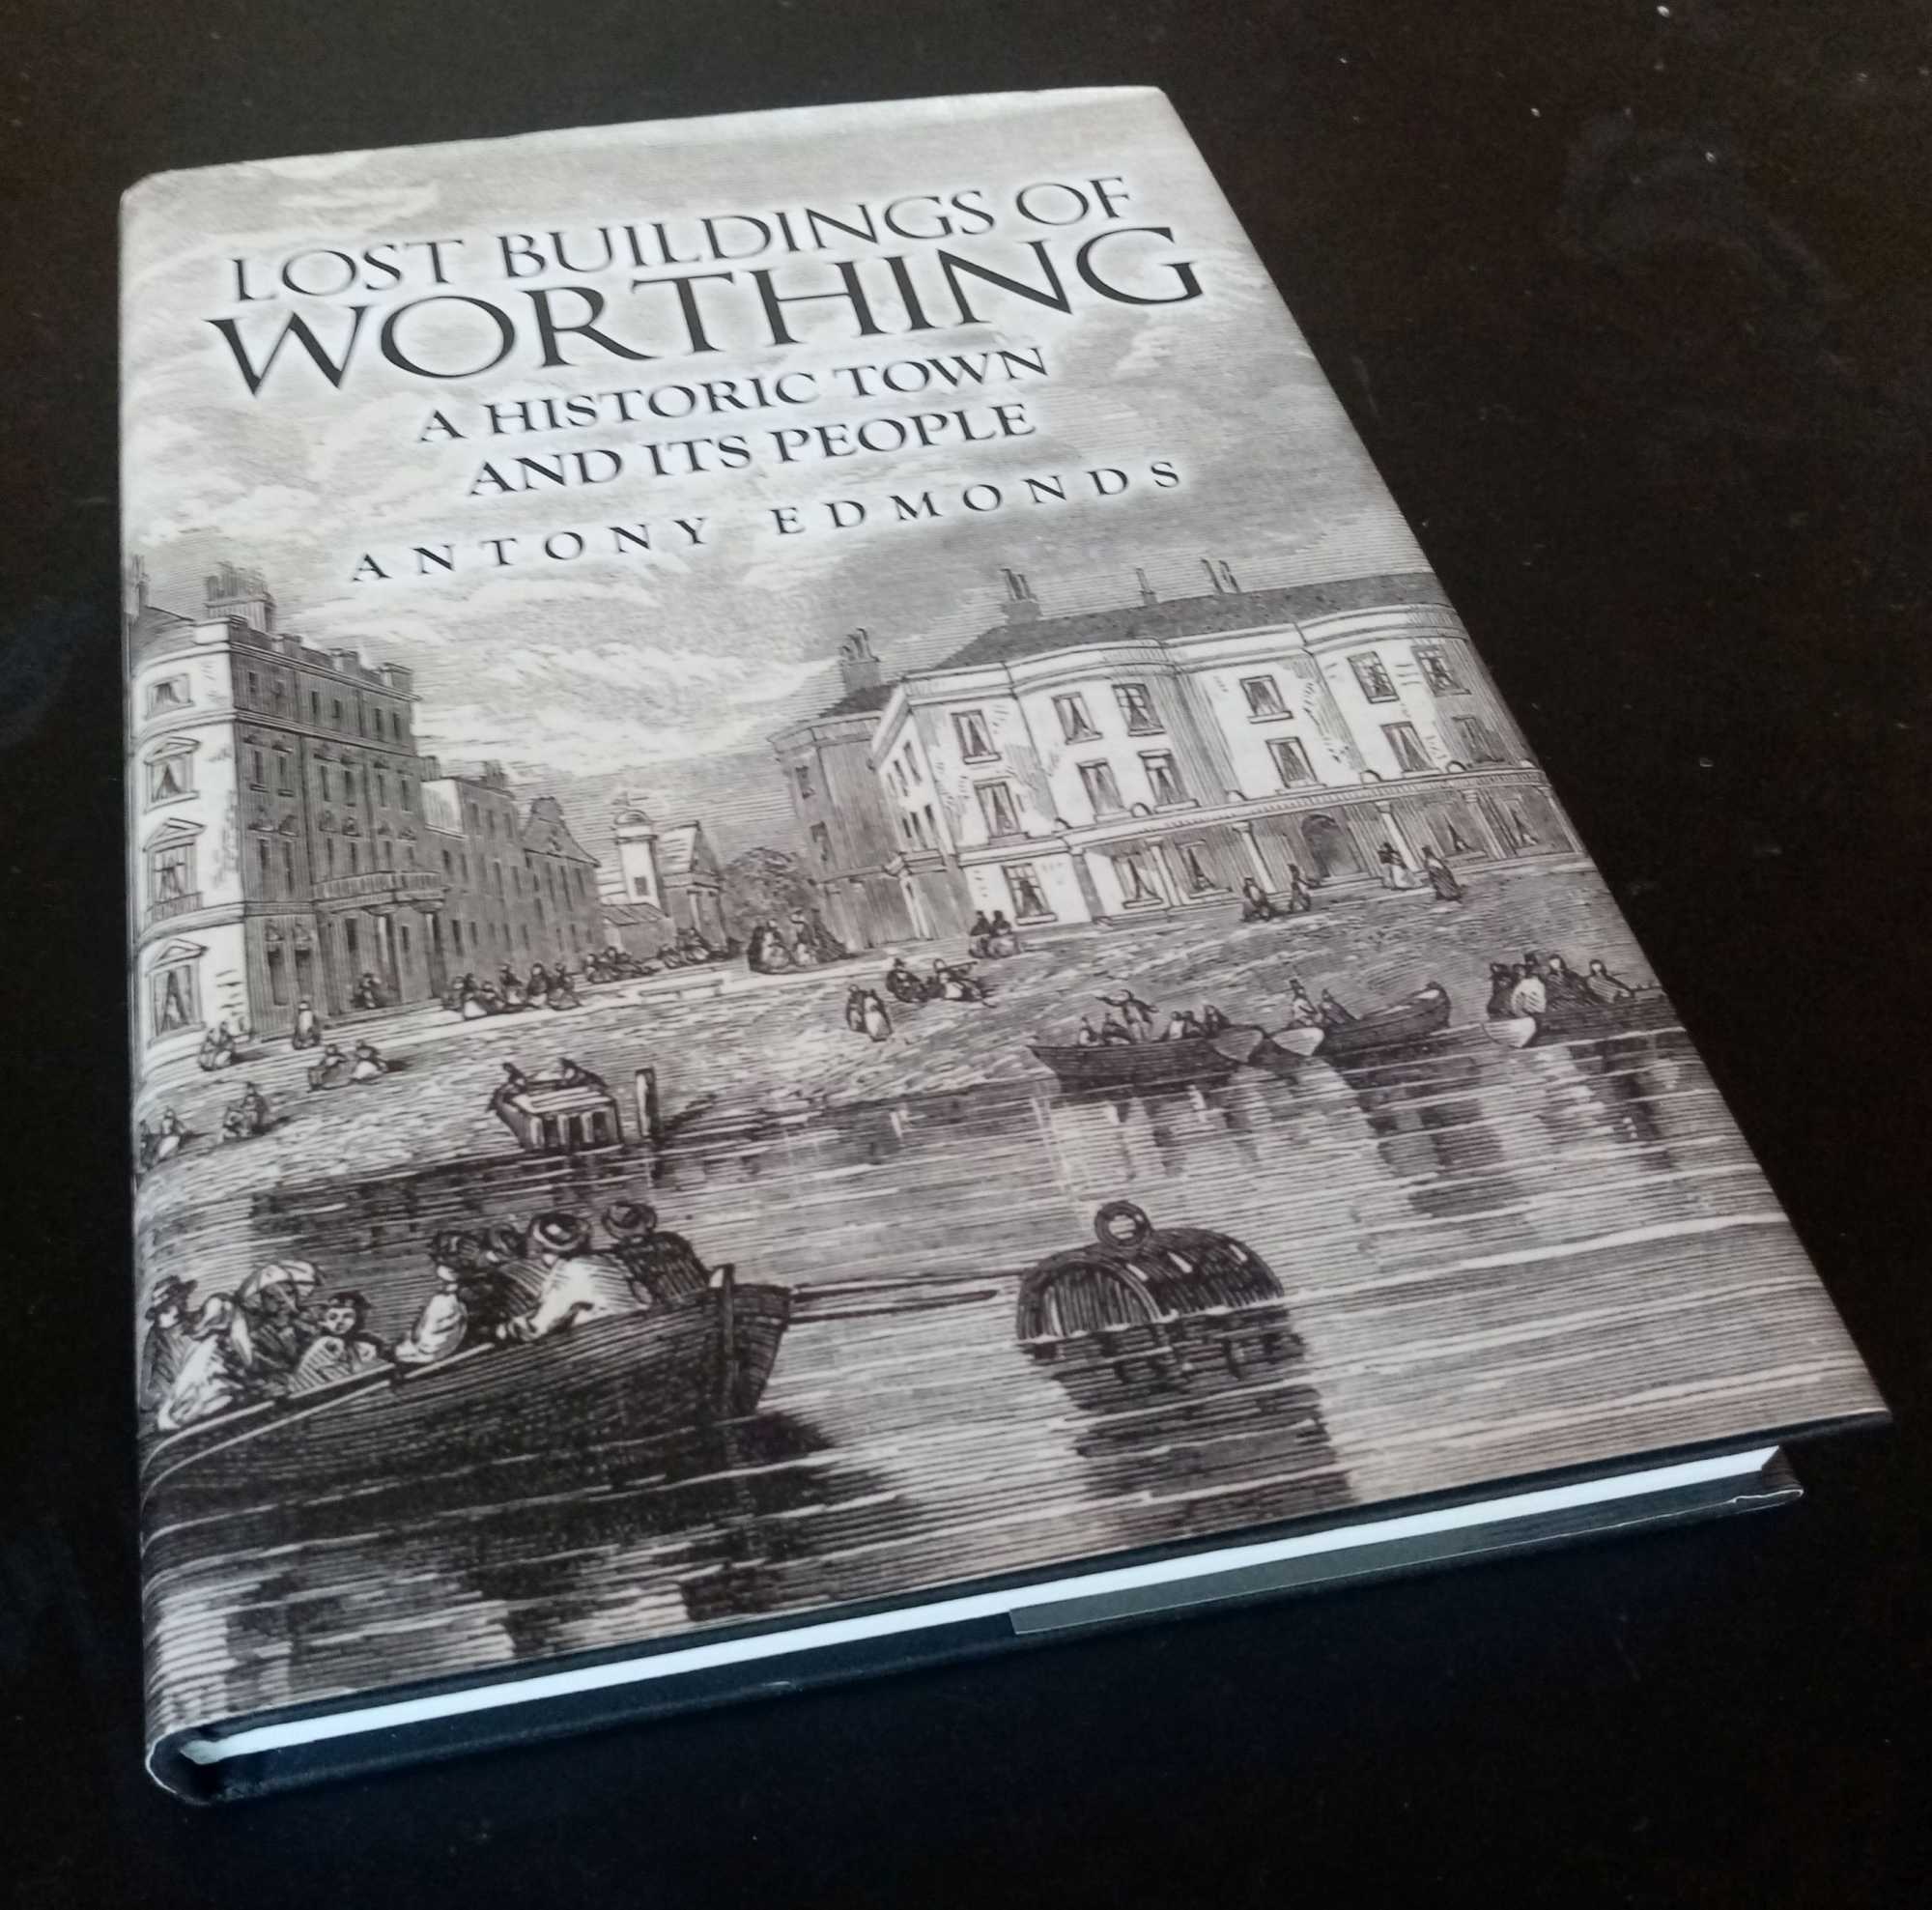 Antony Edmonds - Lost Buildings of Worthing: A Historic Town and its People